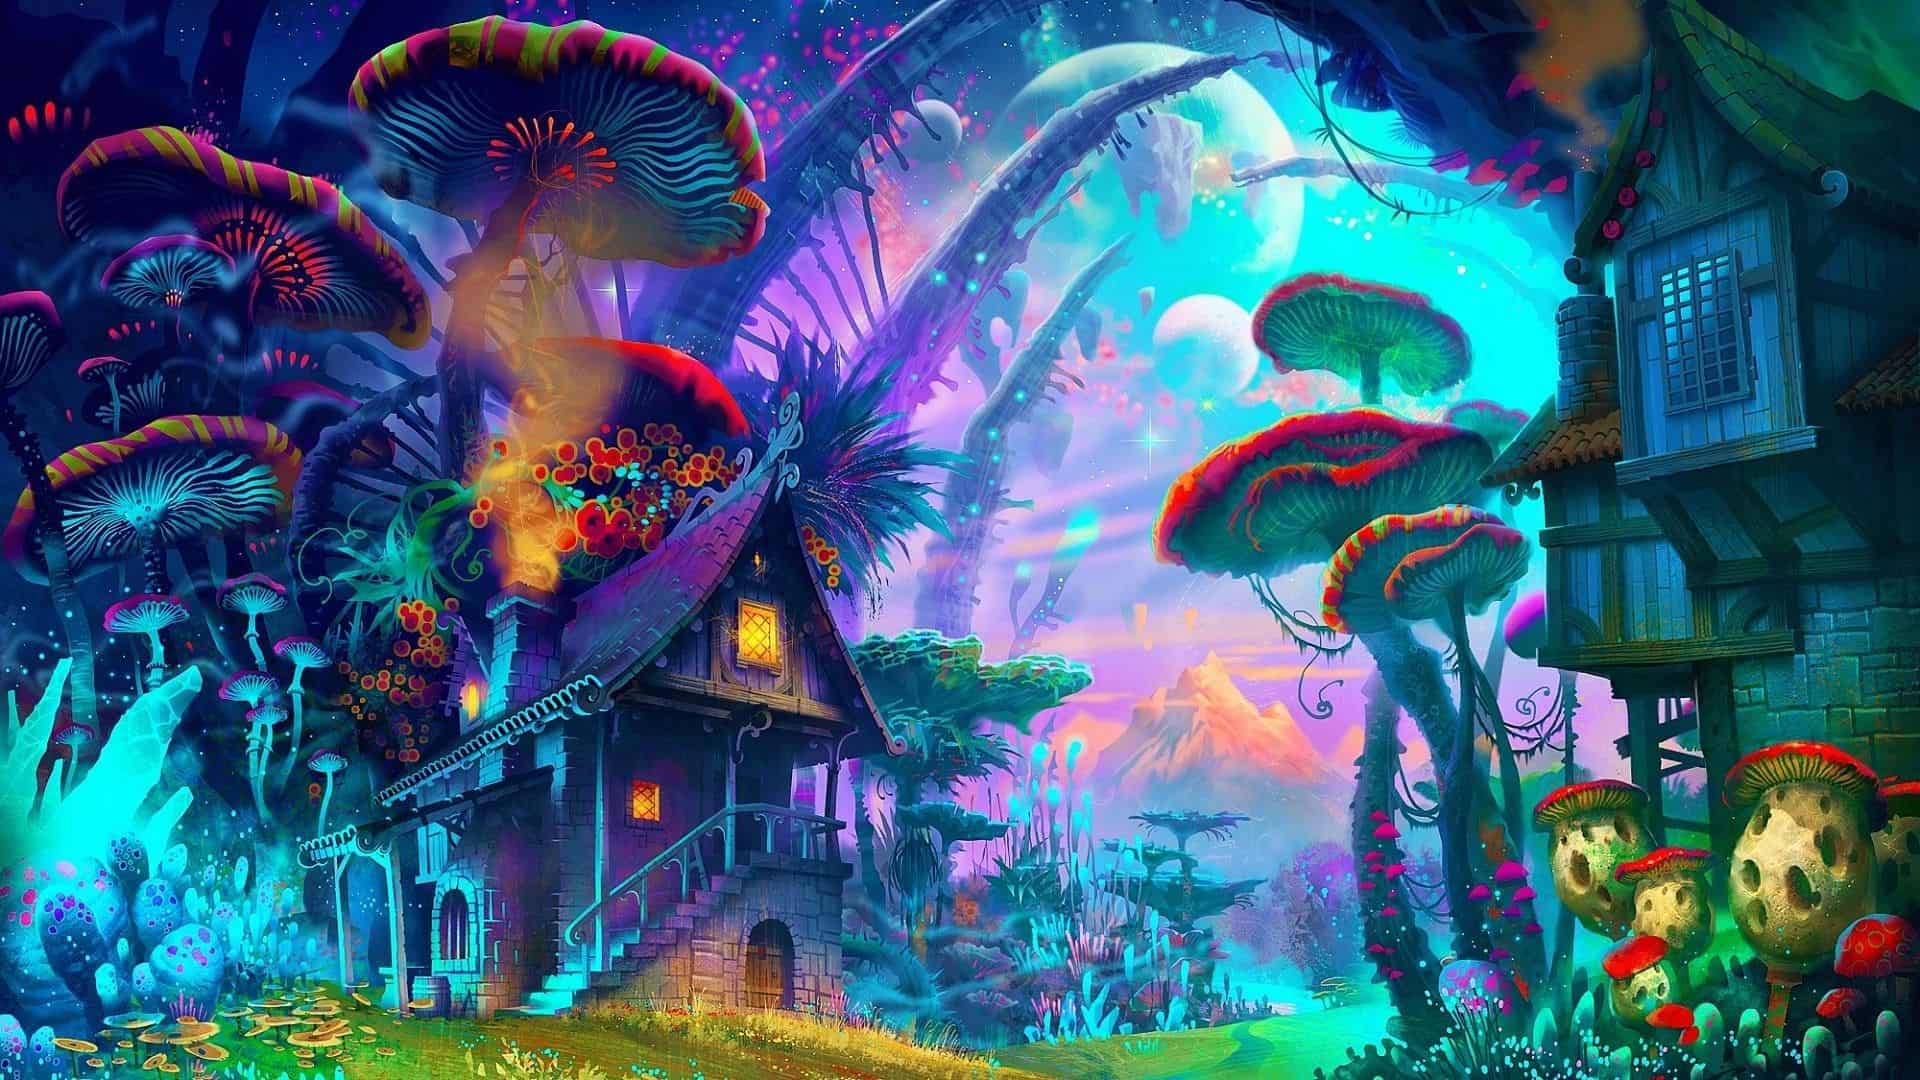 Here Are Some Trippy Wallpapers for your PC